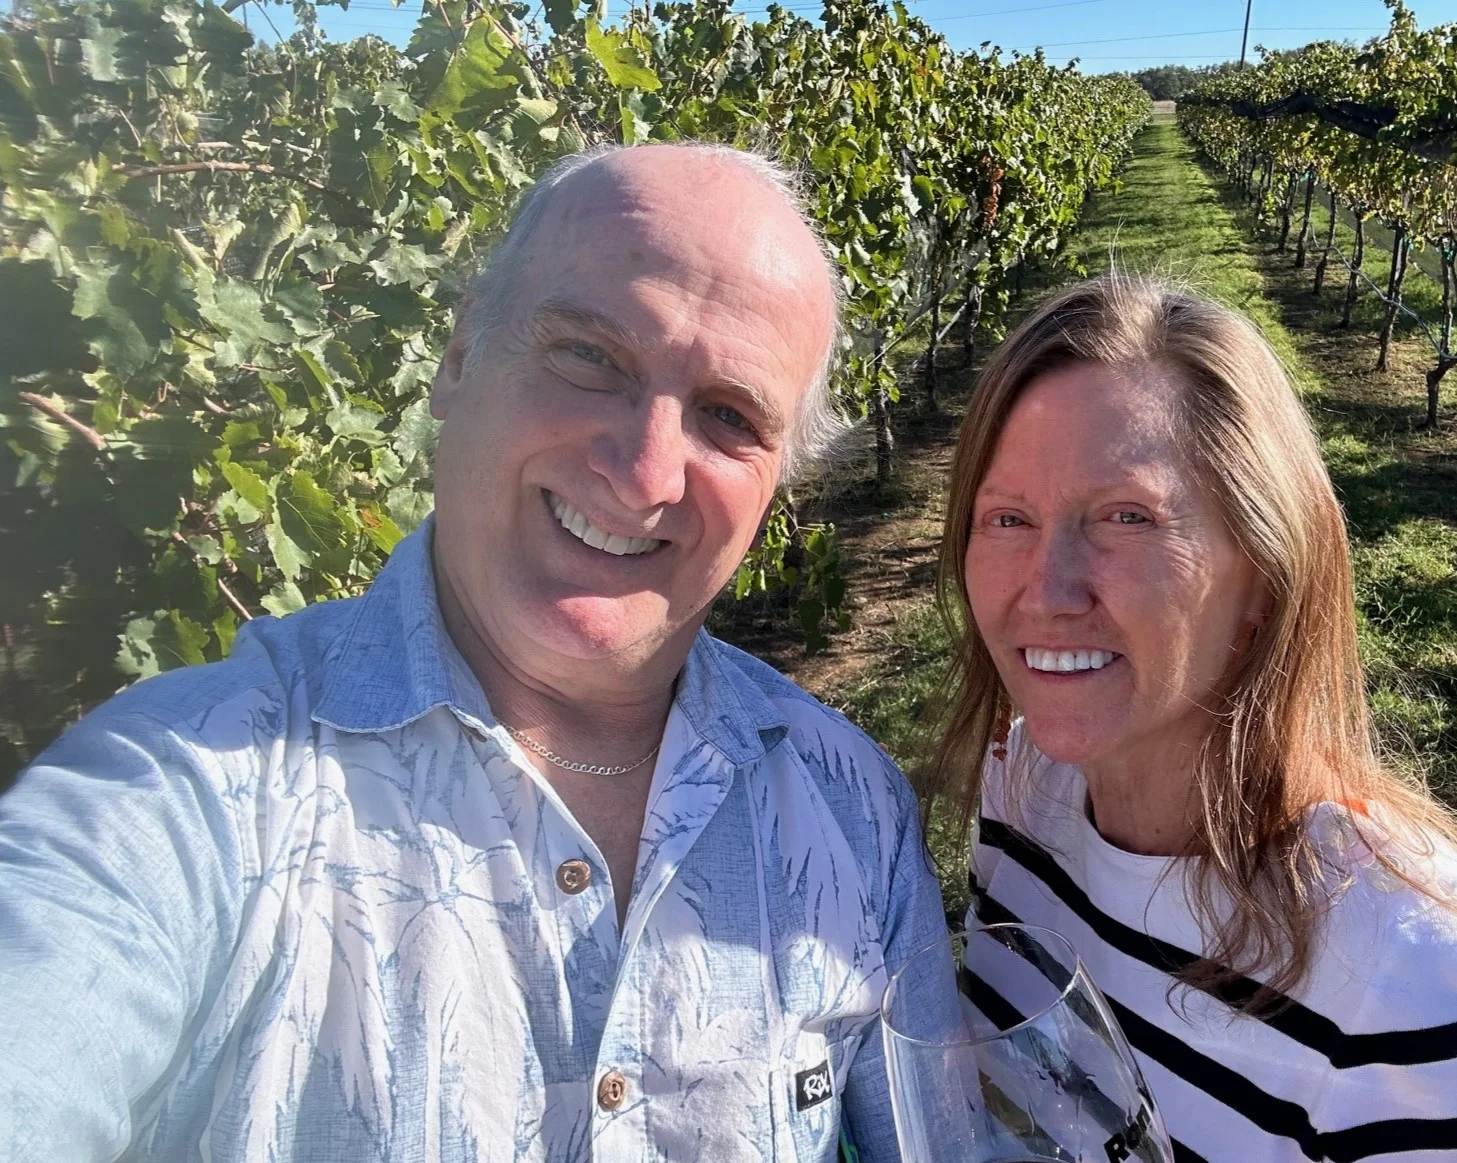 a couple in a vineyard